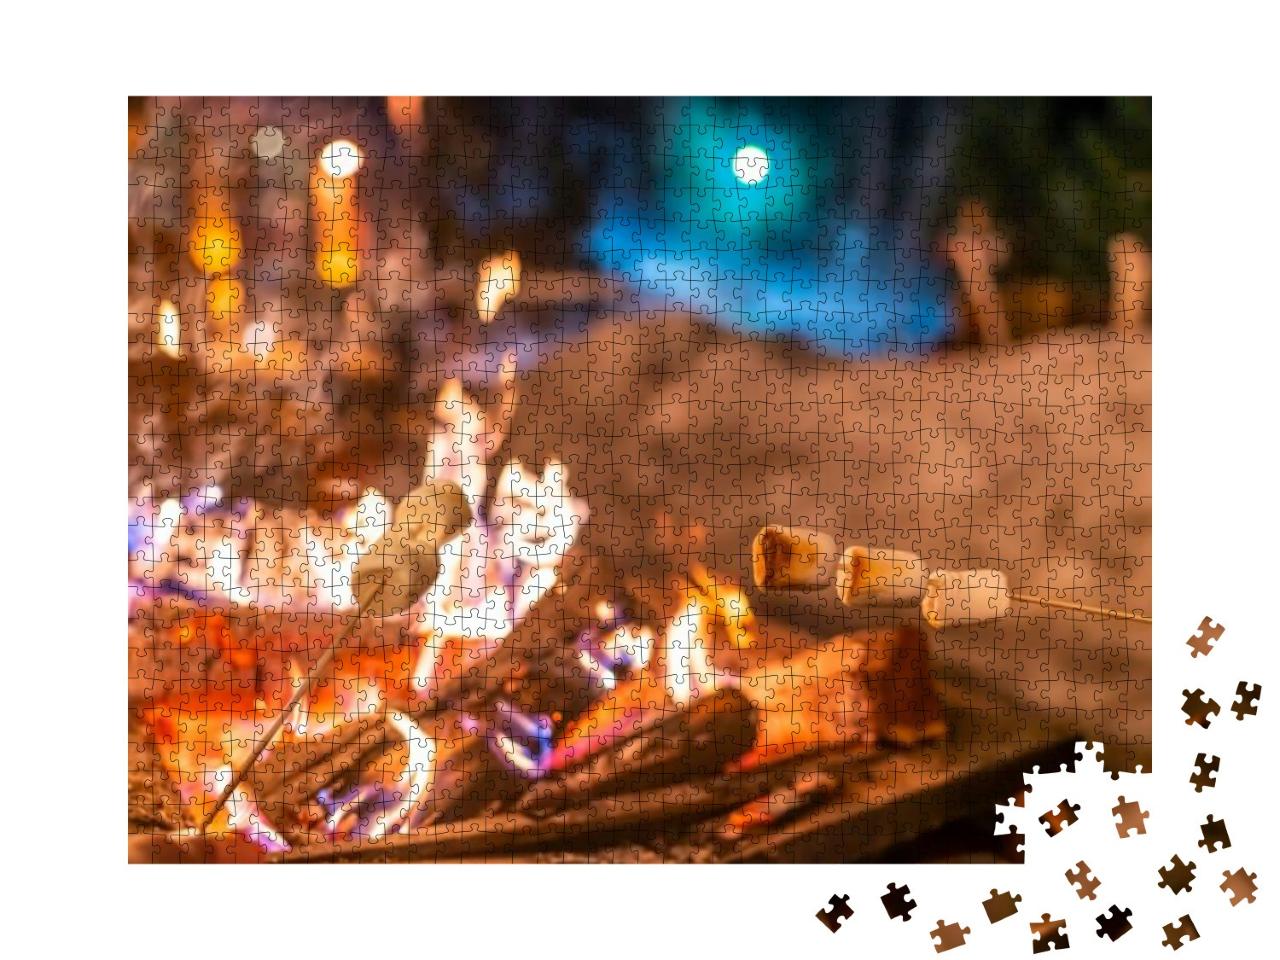 Winter Fire Pit Campfire People Roasting Marshmallows Ove... Jigsaw Puzzle with 1000 pieces